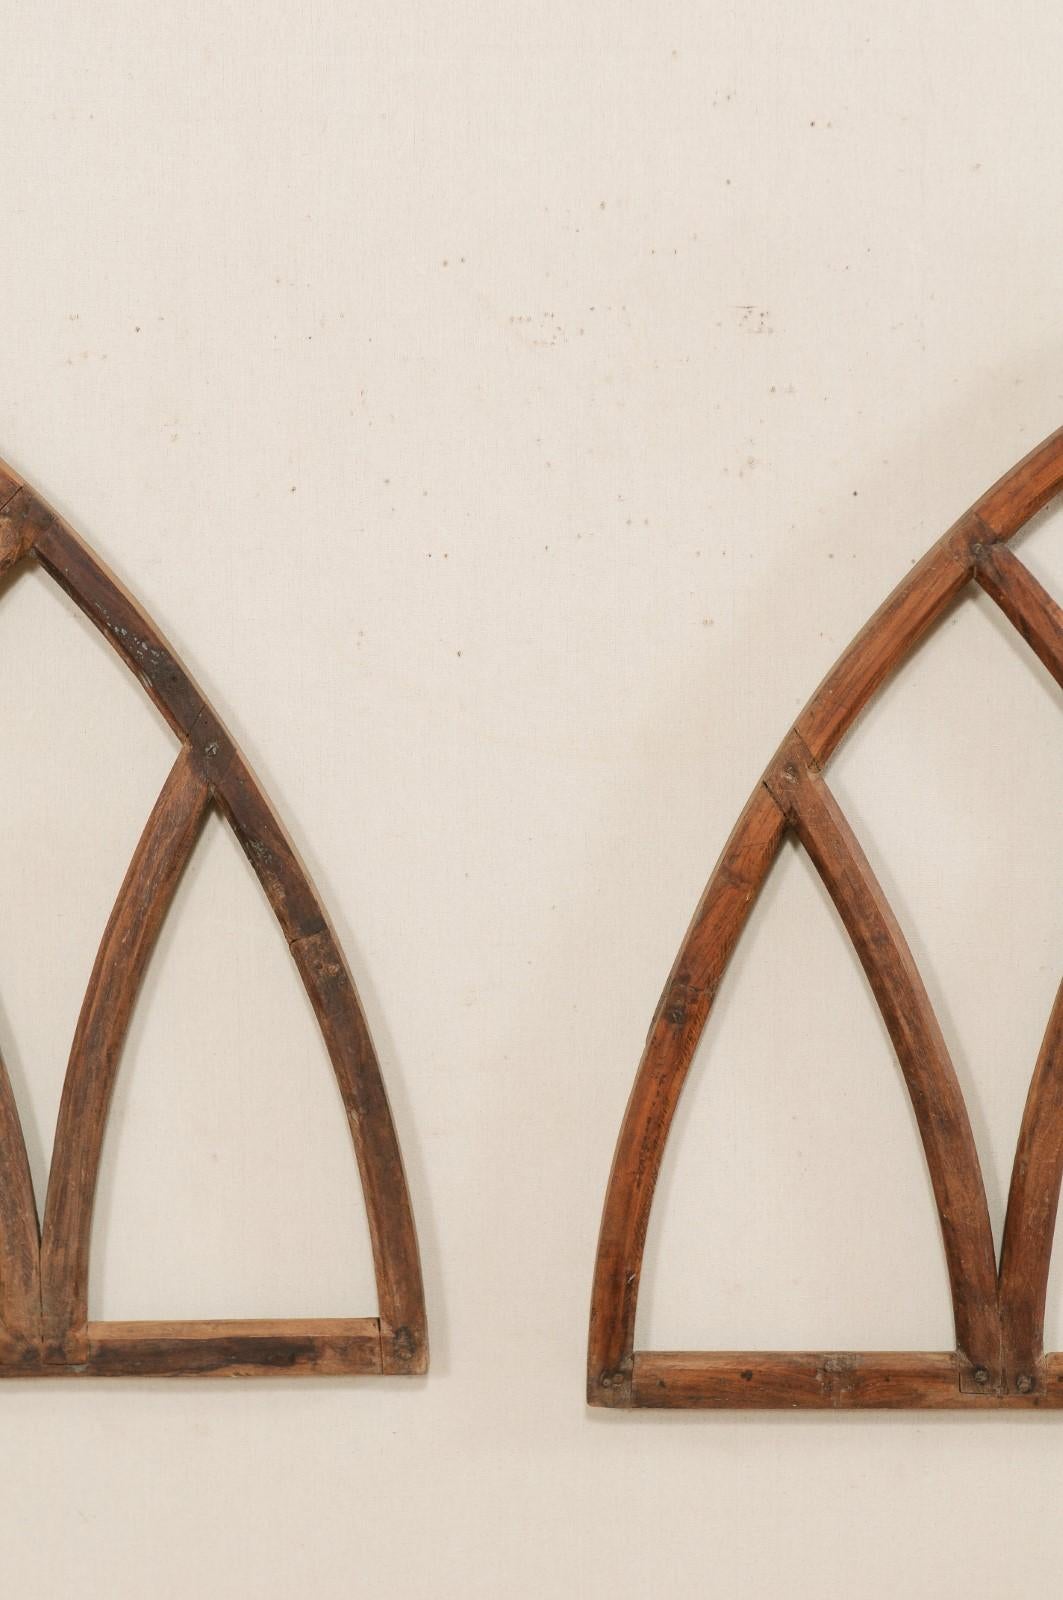 Wood Pair of Antique English Gothic Arch Window Frames